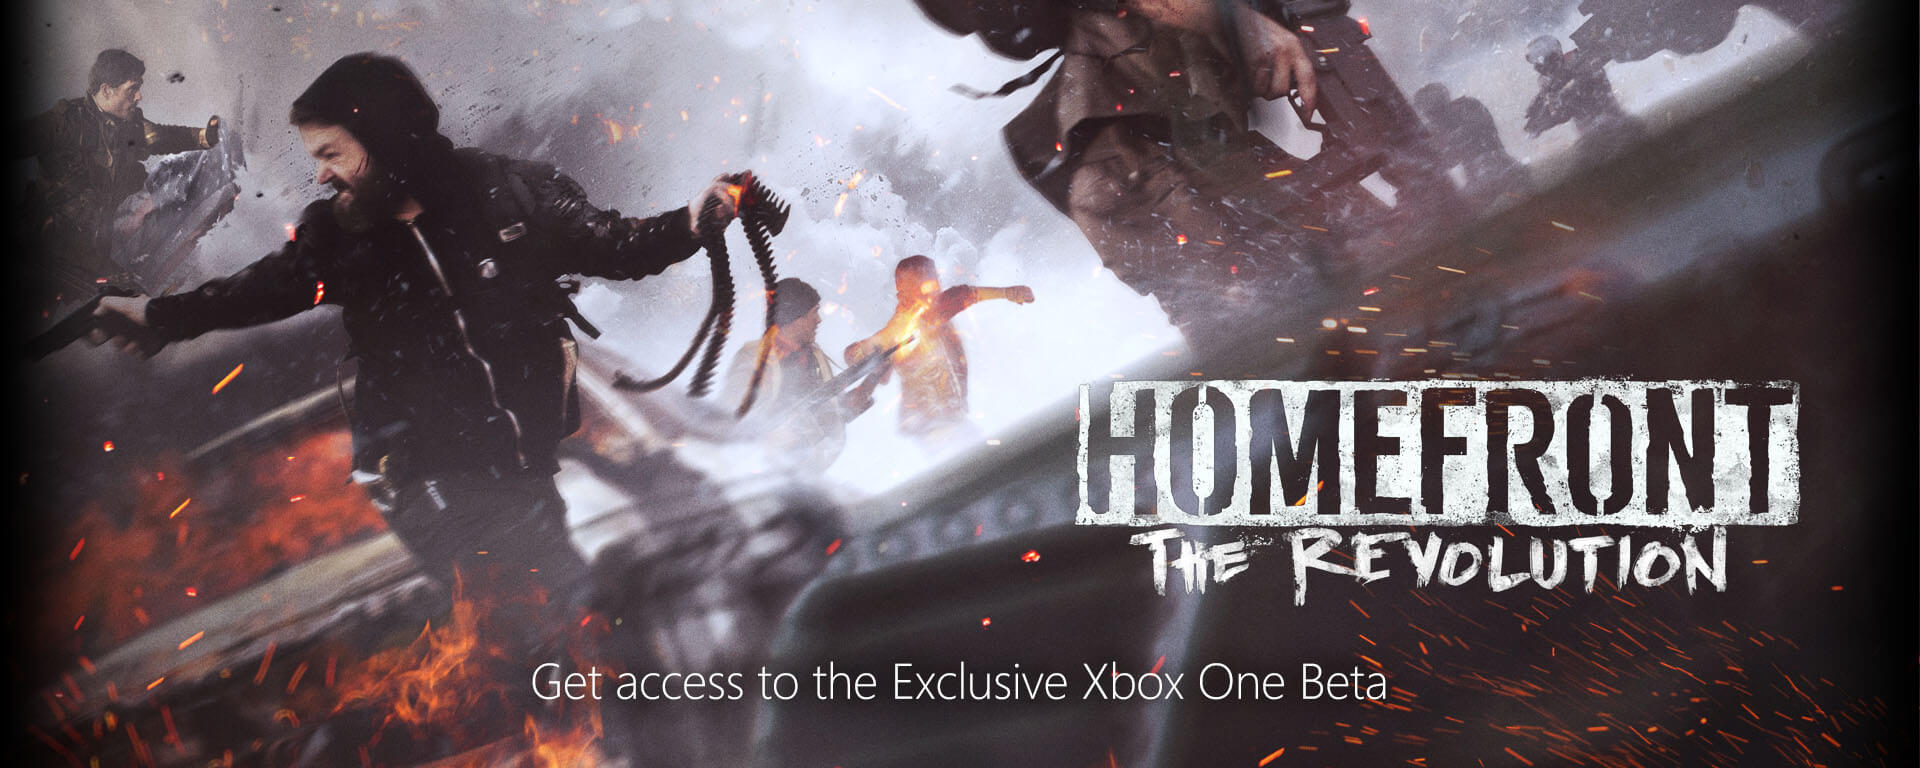 free download homefront xbox